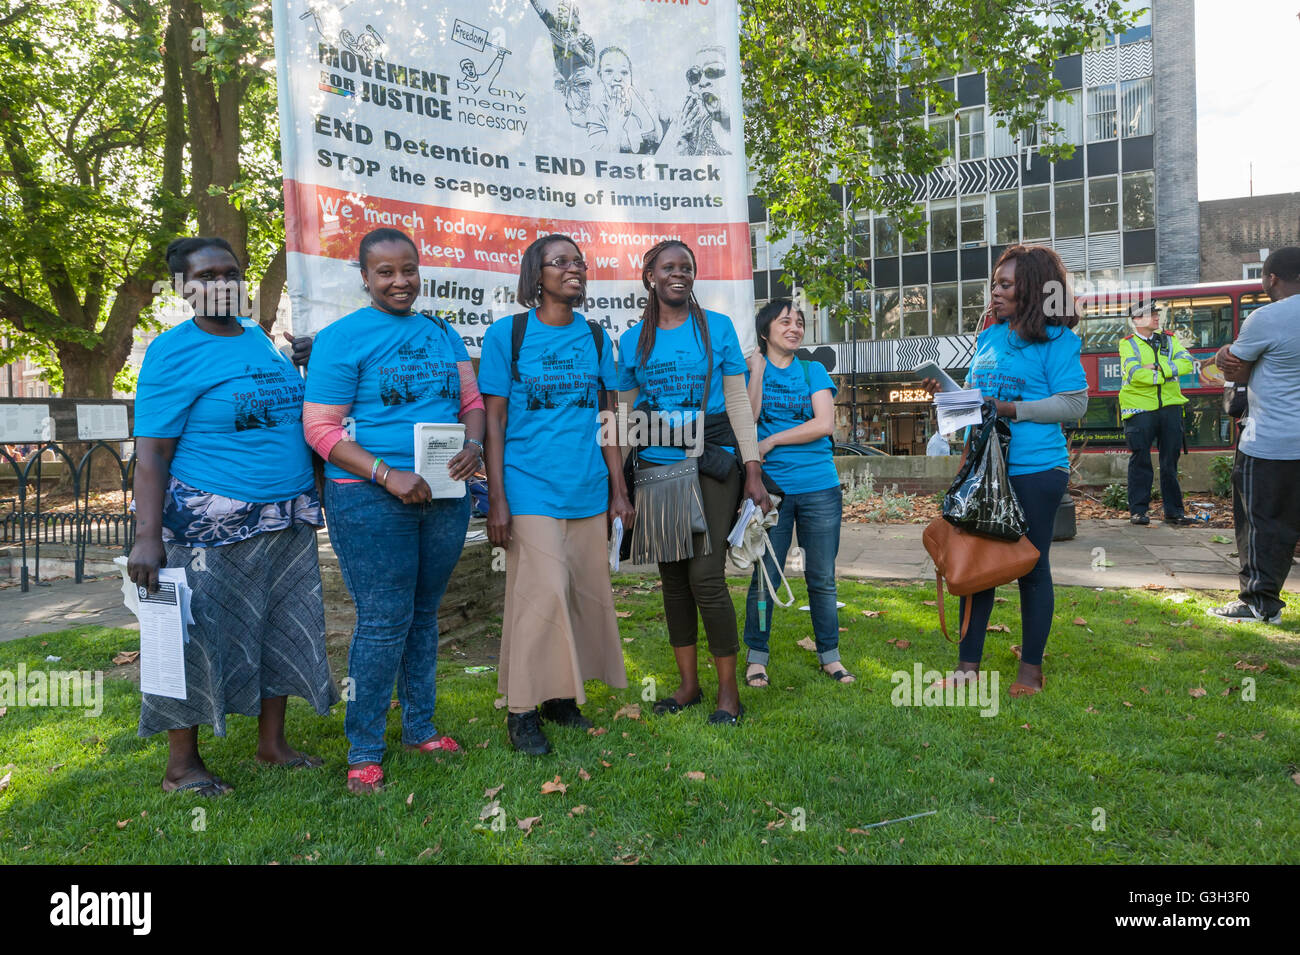 London, UK. June 24th 2016. MOvement for Justice activists with banner at the rally in Altab Ali Park on the day after the UK voted to leave the EU against racism, for migrant rights and against fascist violence. They say that migration and immigrants have been attacked and scapegoated not only by both Remain and Leave campaigns but by mainstream parties and media over more than 20 years, stoking up hatred by insisting immigrants are a 'problem'.Peter Marshall/Alamy Live News Stock Photo